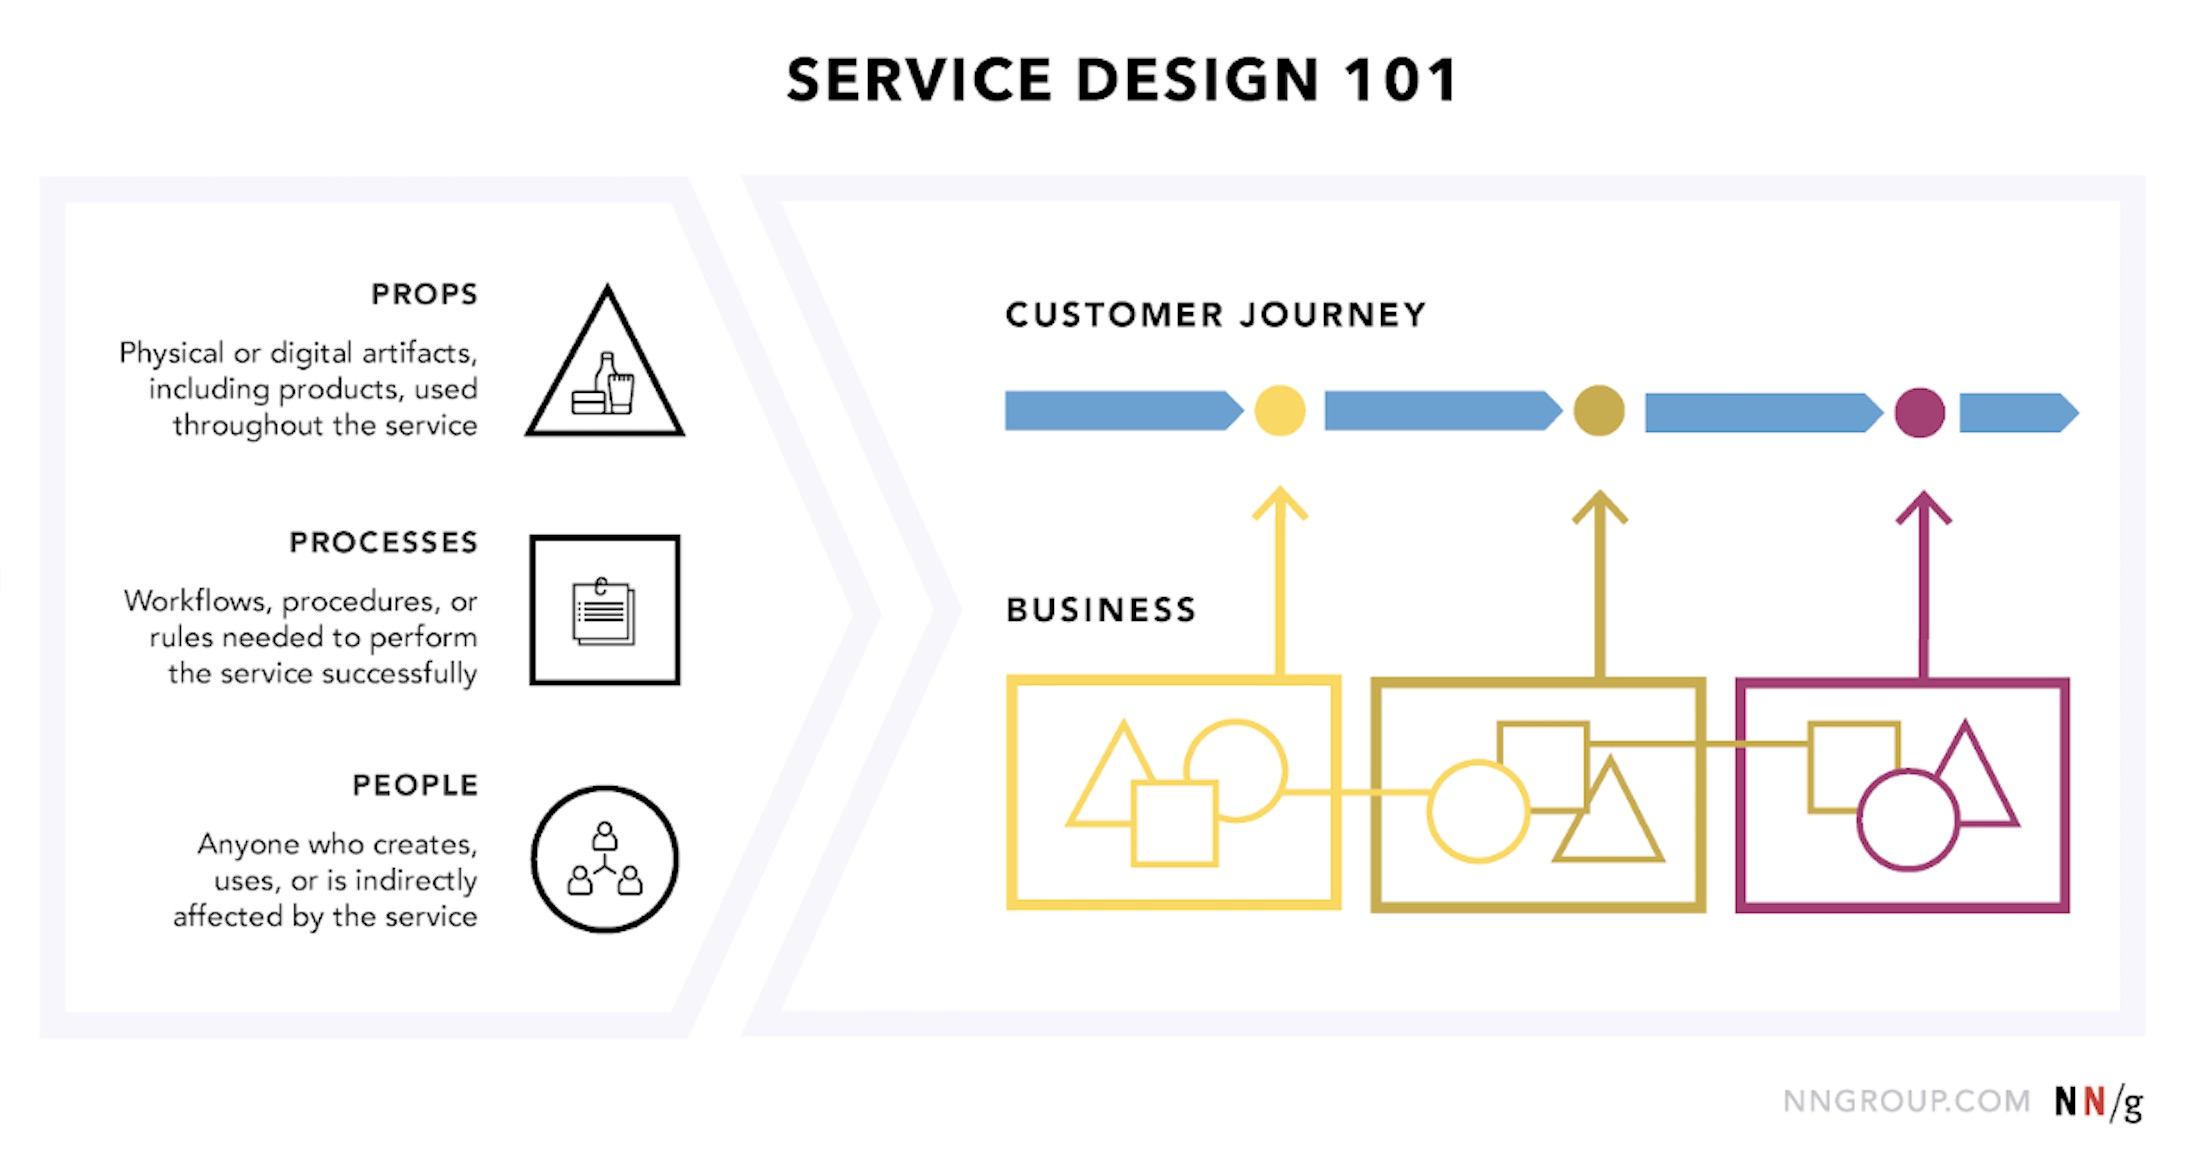 Service Design 101. Props, processes, and people. Props are physical or digital artifacts, including products, used throughout the service. Processes are workflows, procedures, or rules needed to perform the service successfully. People are anyone who creates, uses, or is indirectly affected by the service. These and the business are then mapped to the customer journey.